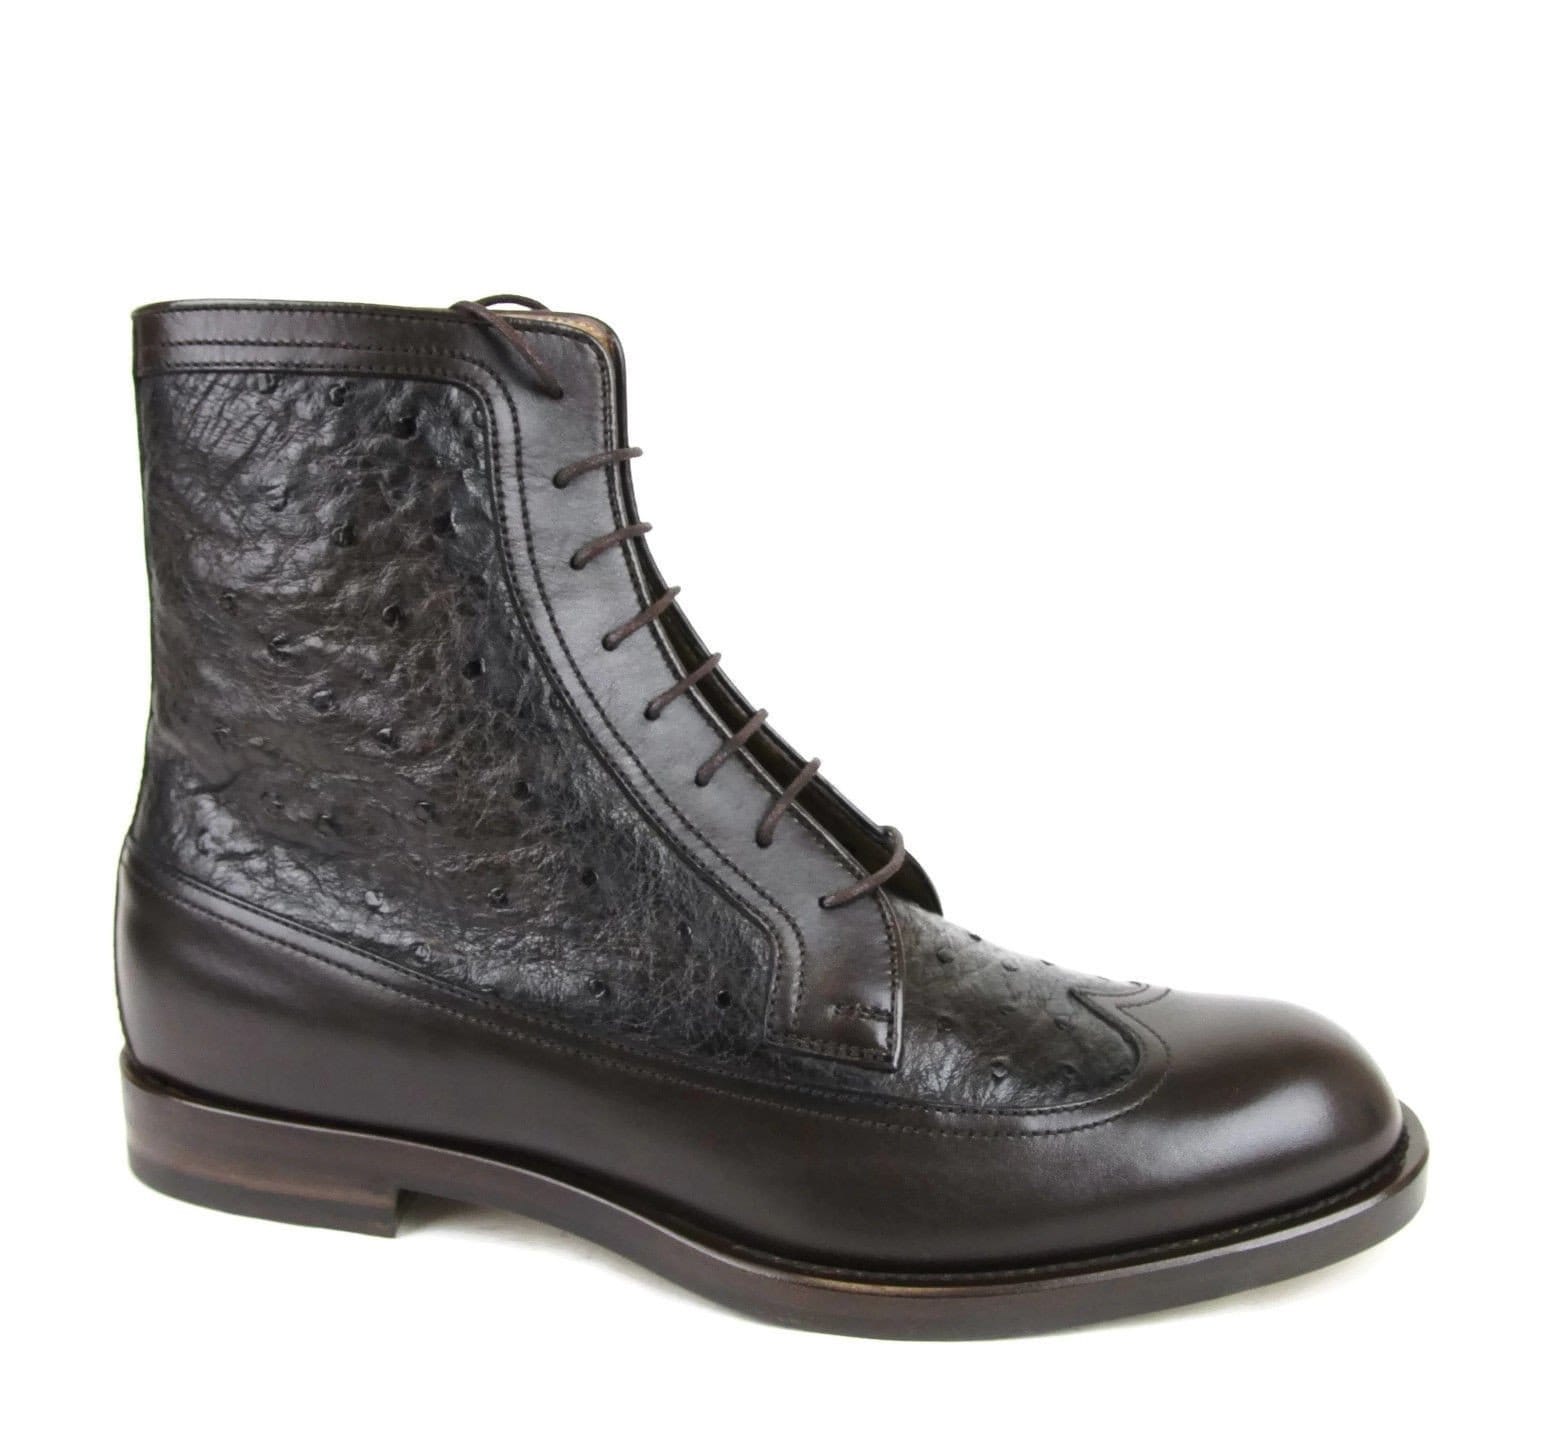 Gucci Men's Ostrich Leather Lace-up Ankle Boots